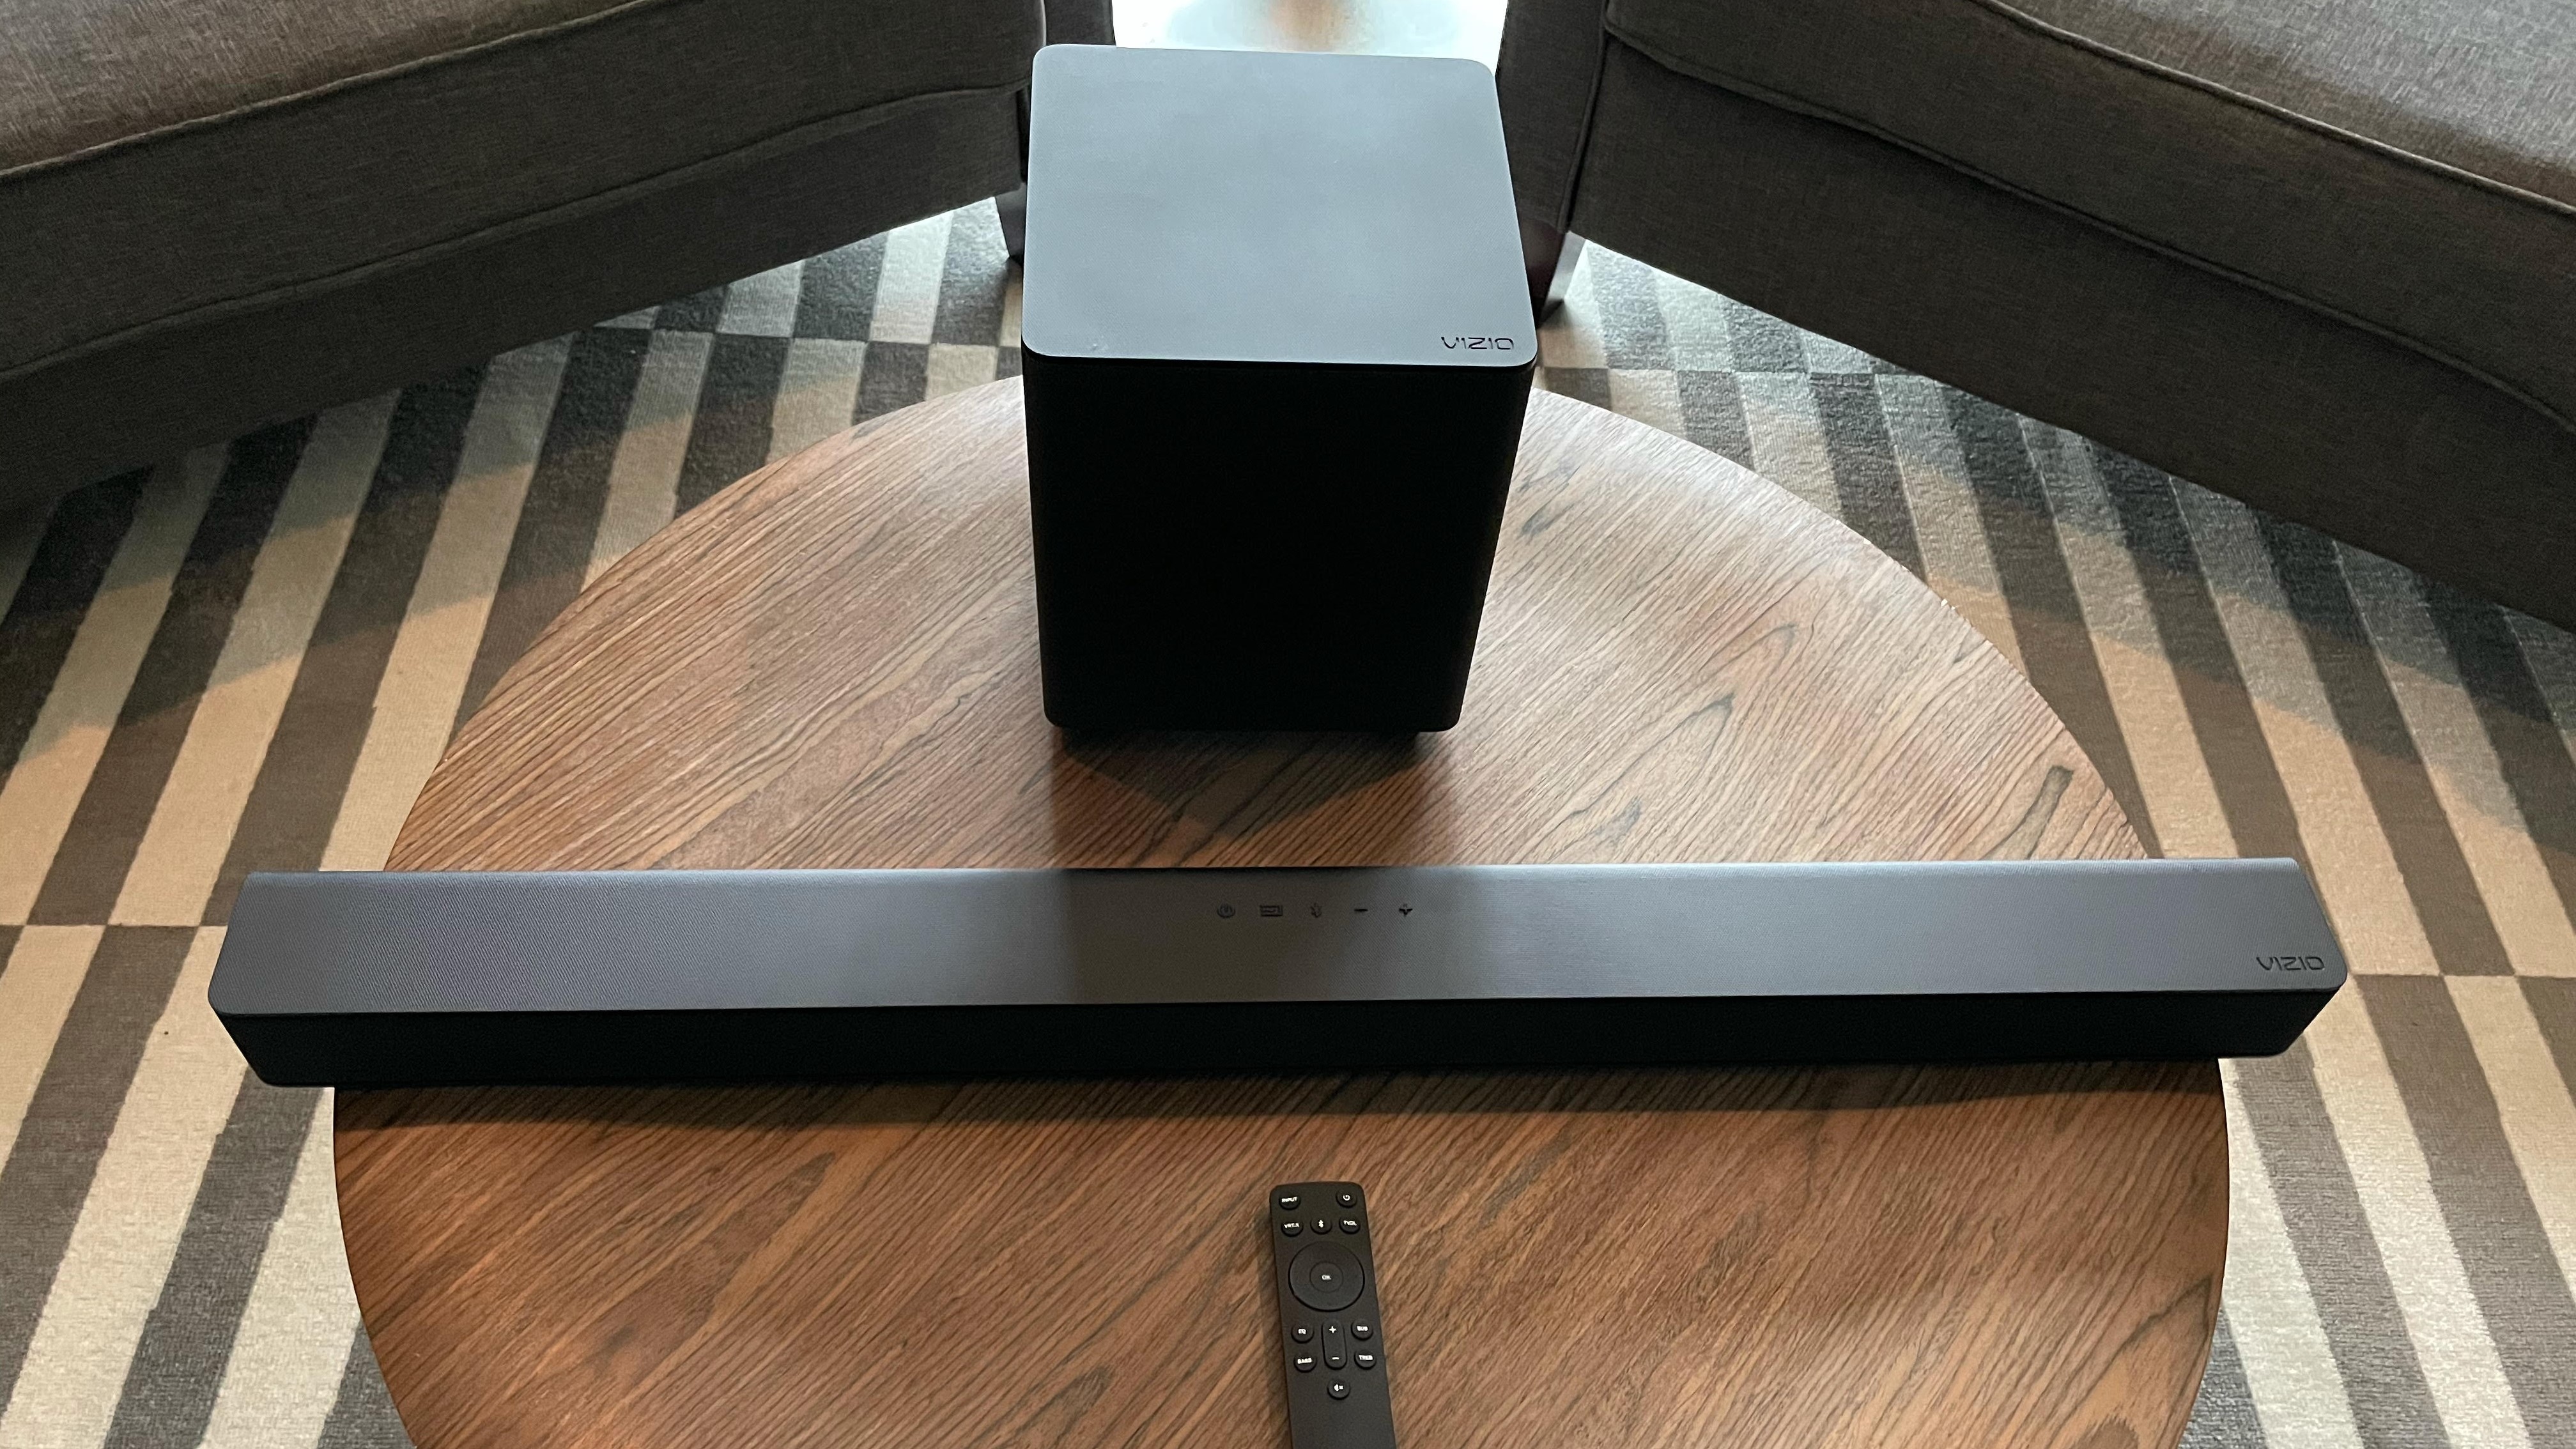 Vizio V-Series 2.1 Home Theater Soundbar V21-H8 is placed on a wooden table